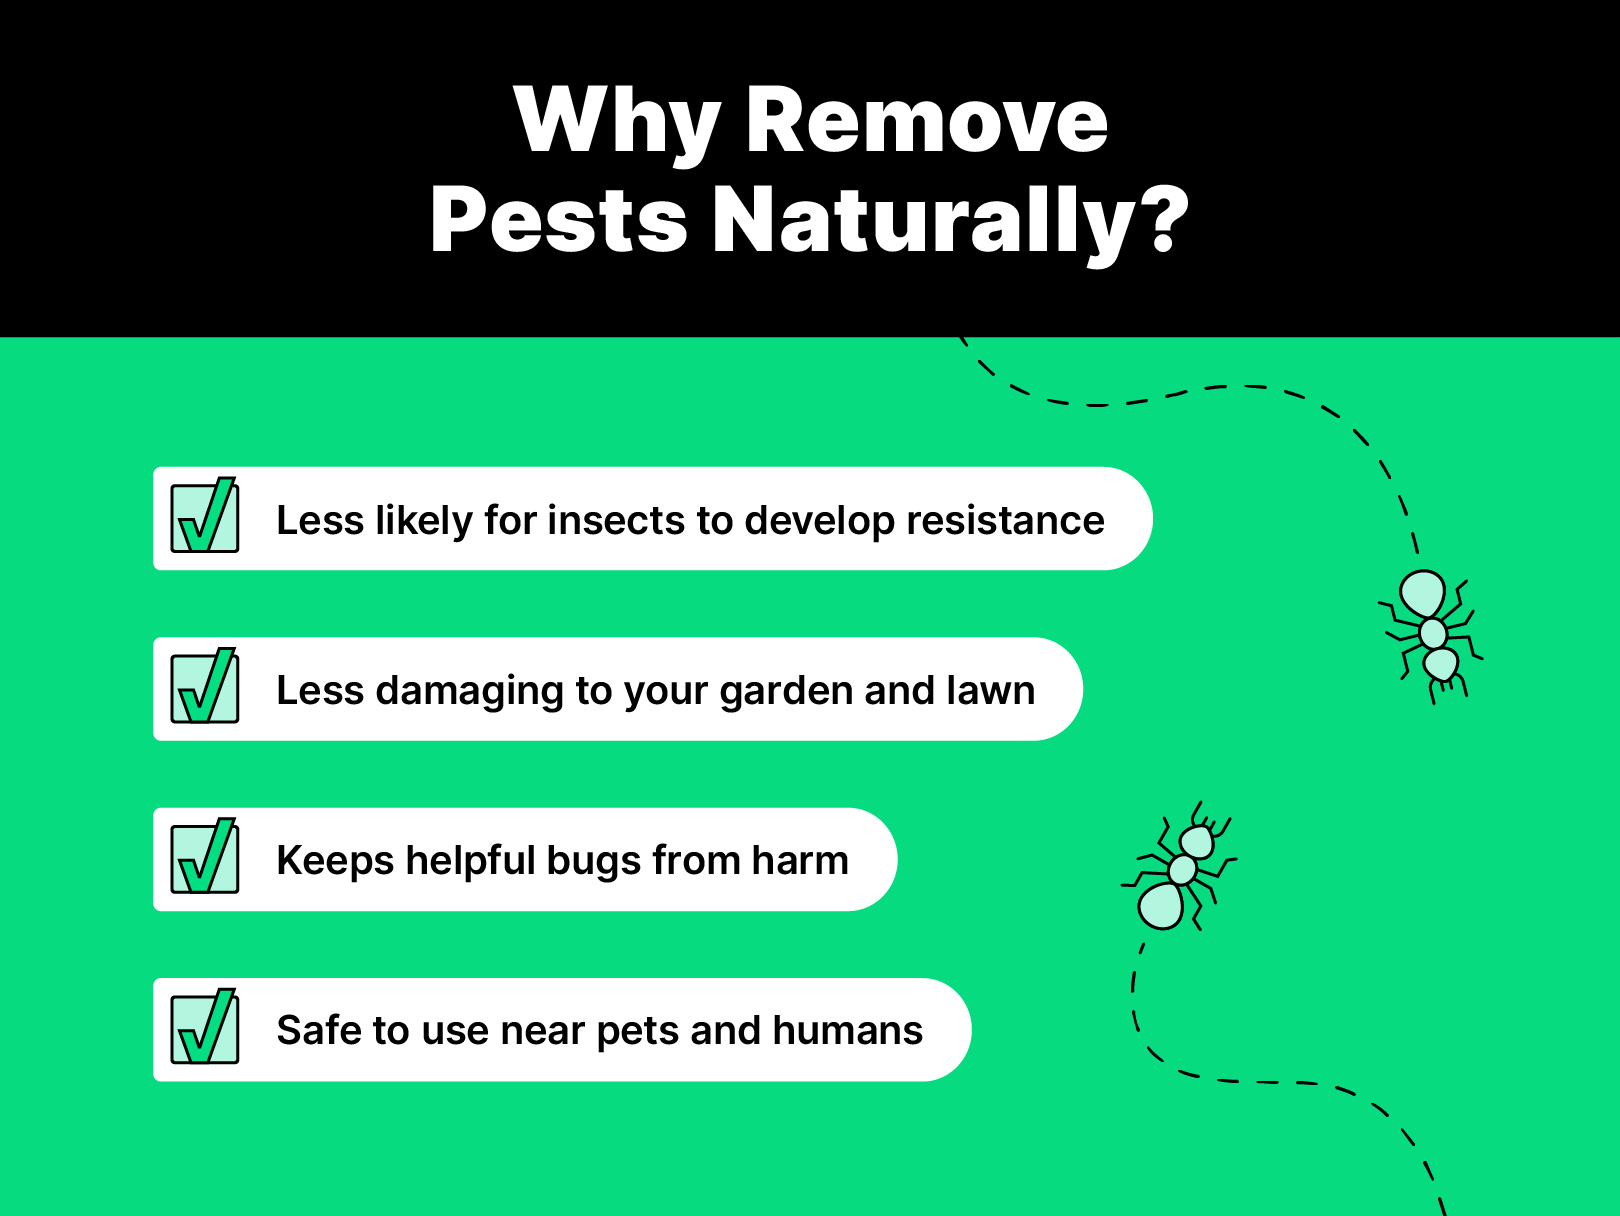 Illustrations of ants crawling with reasons to remove pests naturally